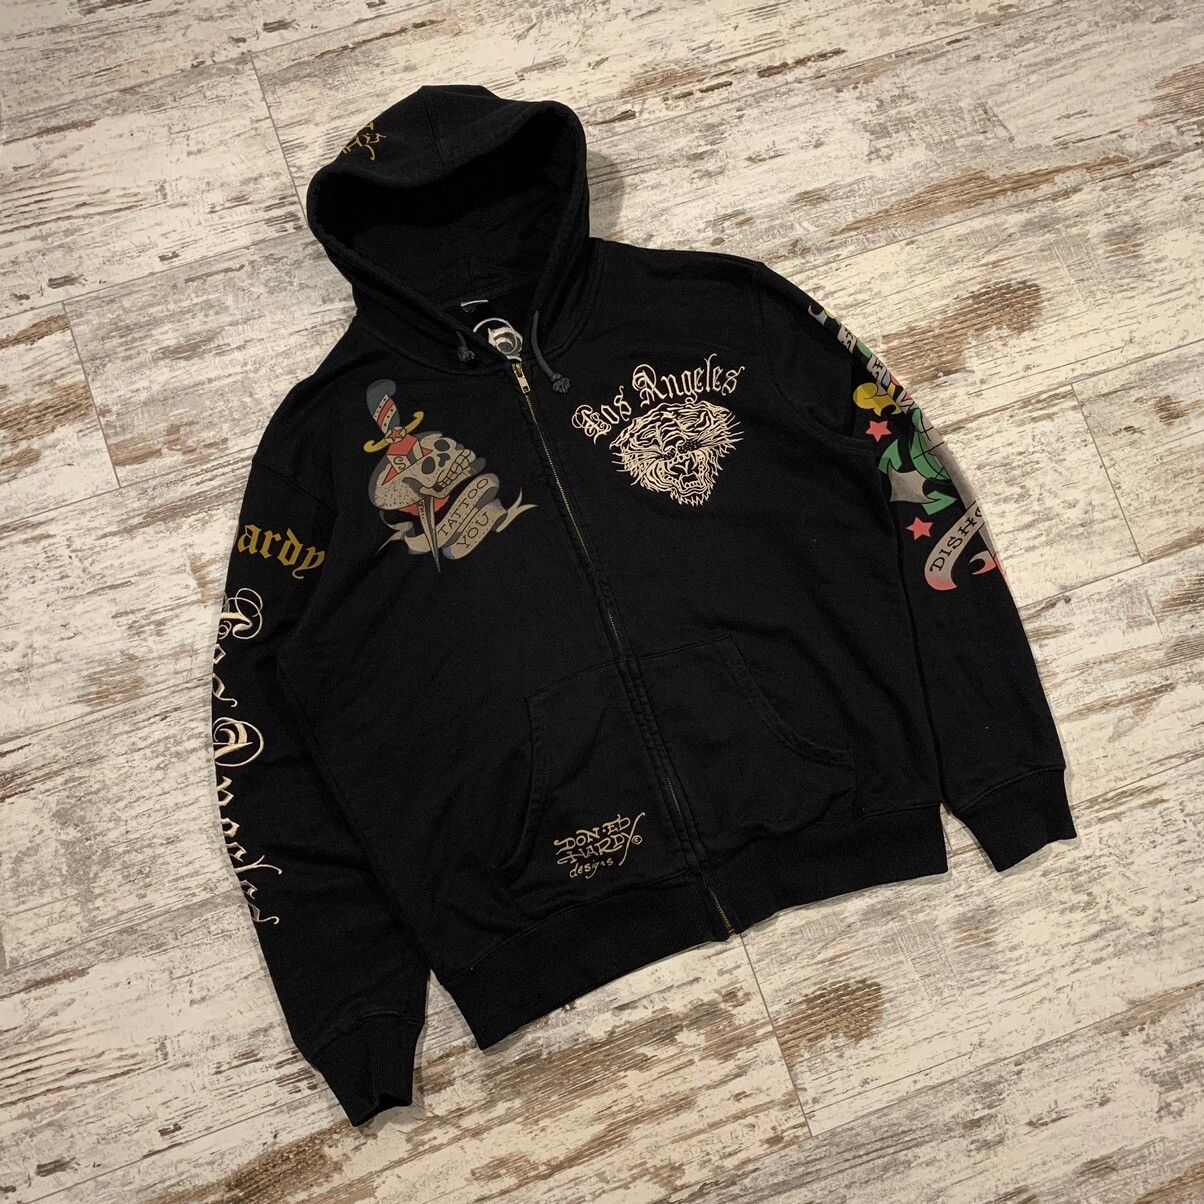 Vintage VINTAGE ED HARDY BY CHRISTIAN AUDIGIER LOS ANGELES HOODIE Size US L / EU 52-54 / 3 - 1 Preview